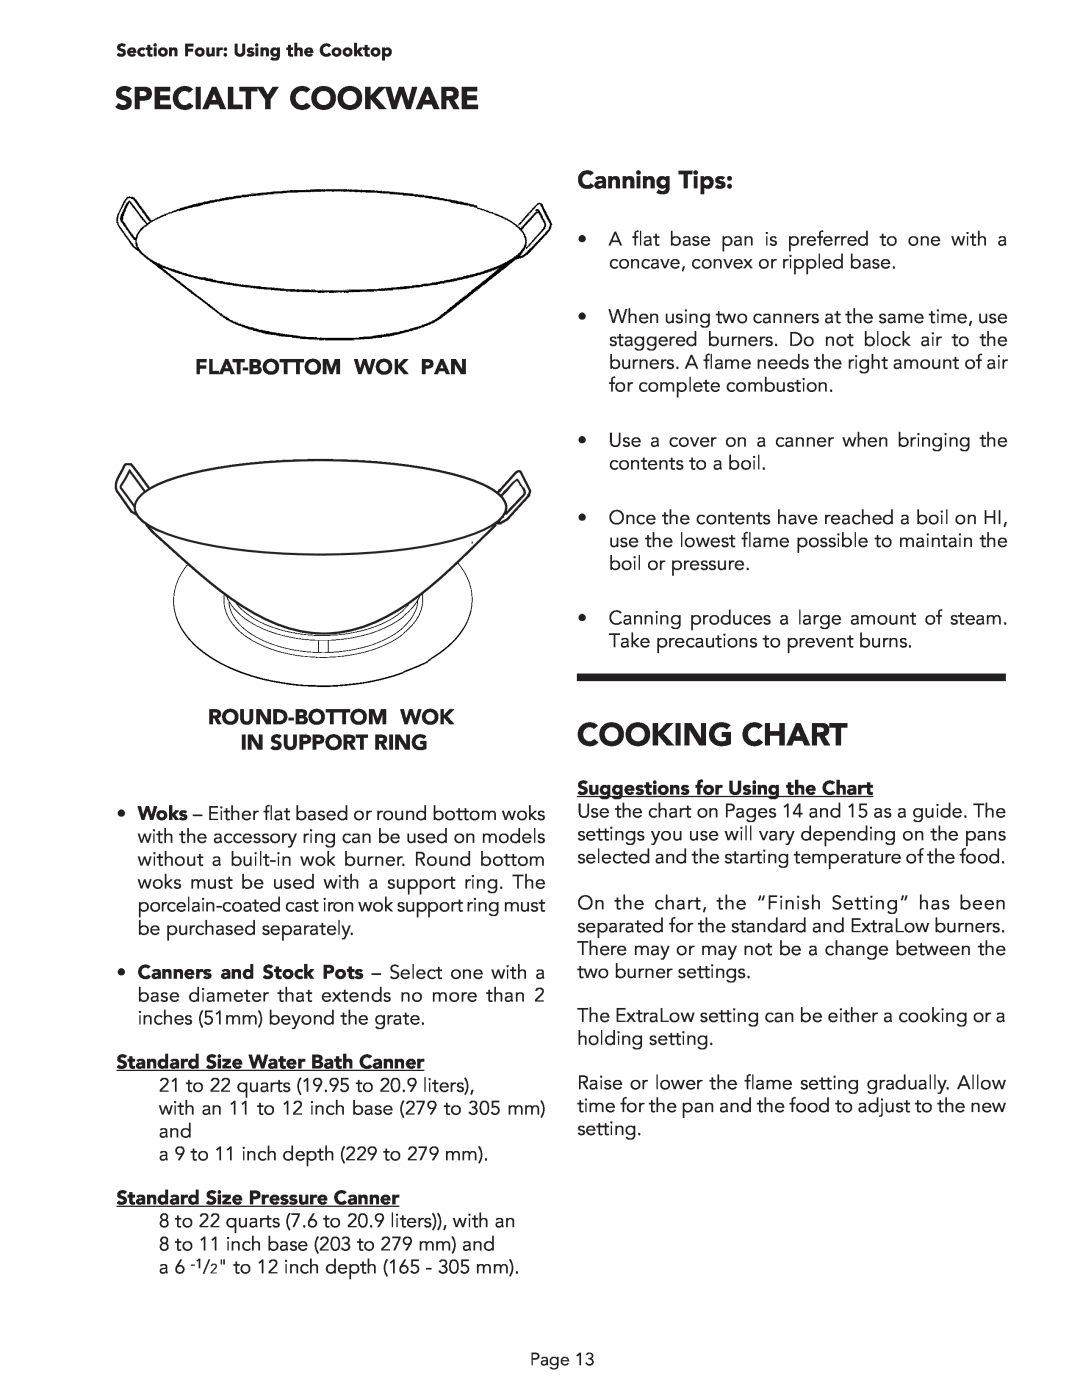 Thermador PSC364GD Specialty Cookware, Cooking Chart, Canning Tips, Flat-Bottom Wok Pan, Round-Bottom Wok In Support Ring 